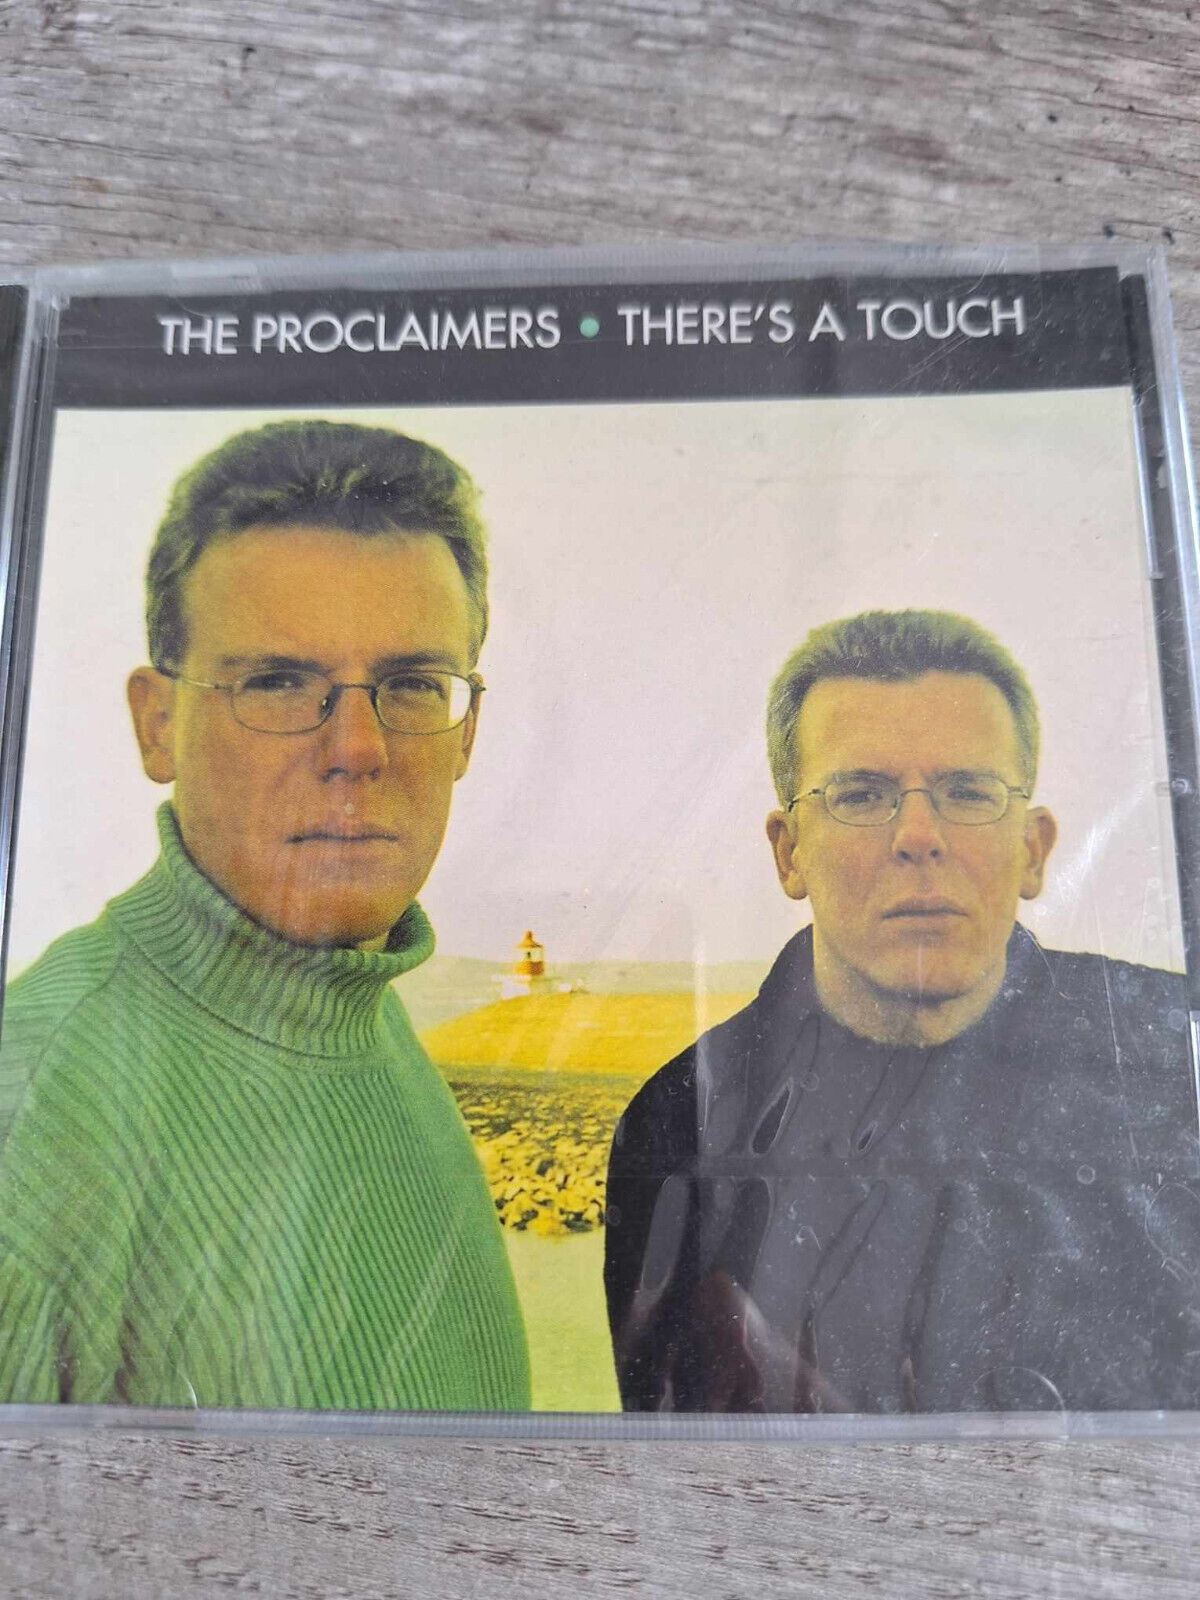 Primary image for There's a Touch [Single] by The Proclaimers (CD, May-2001, Nettwerk) 